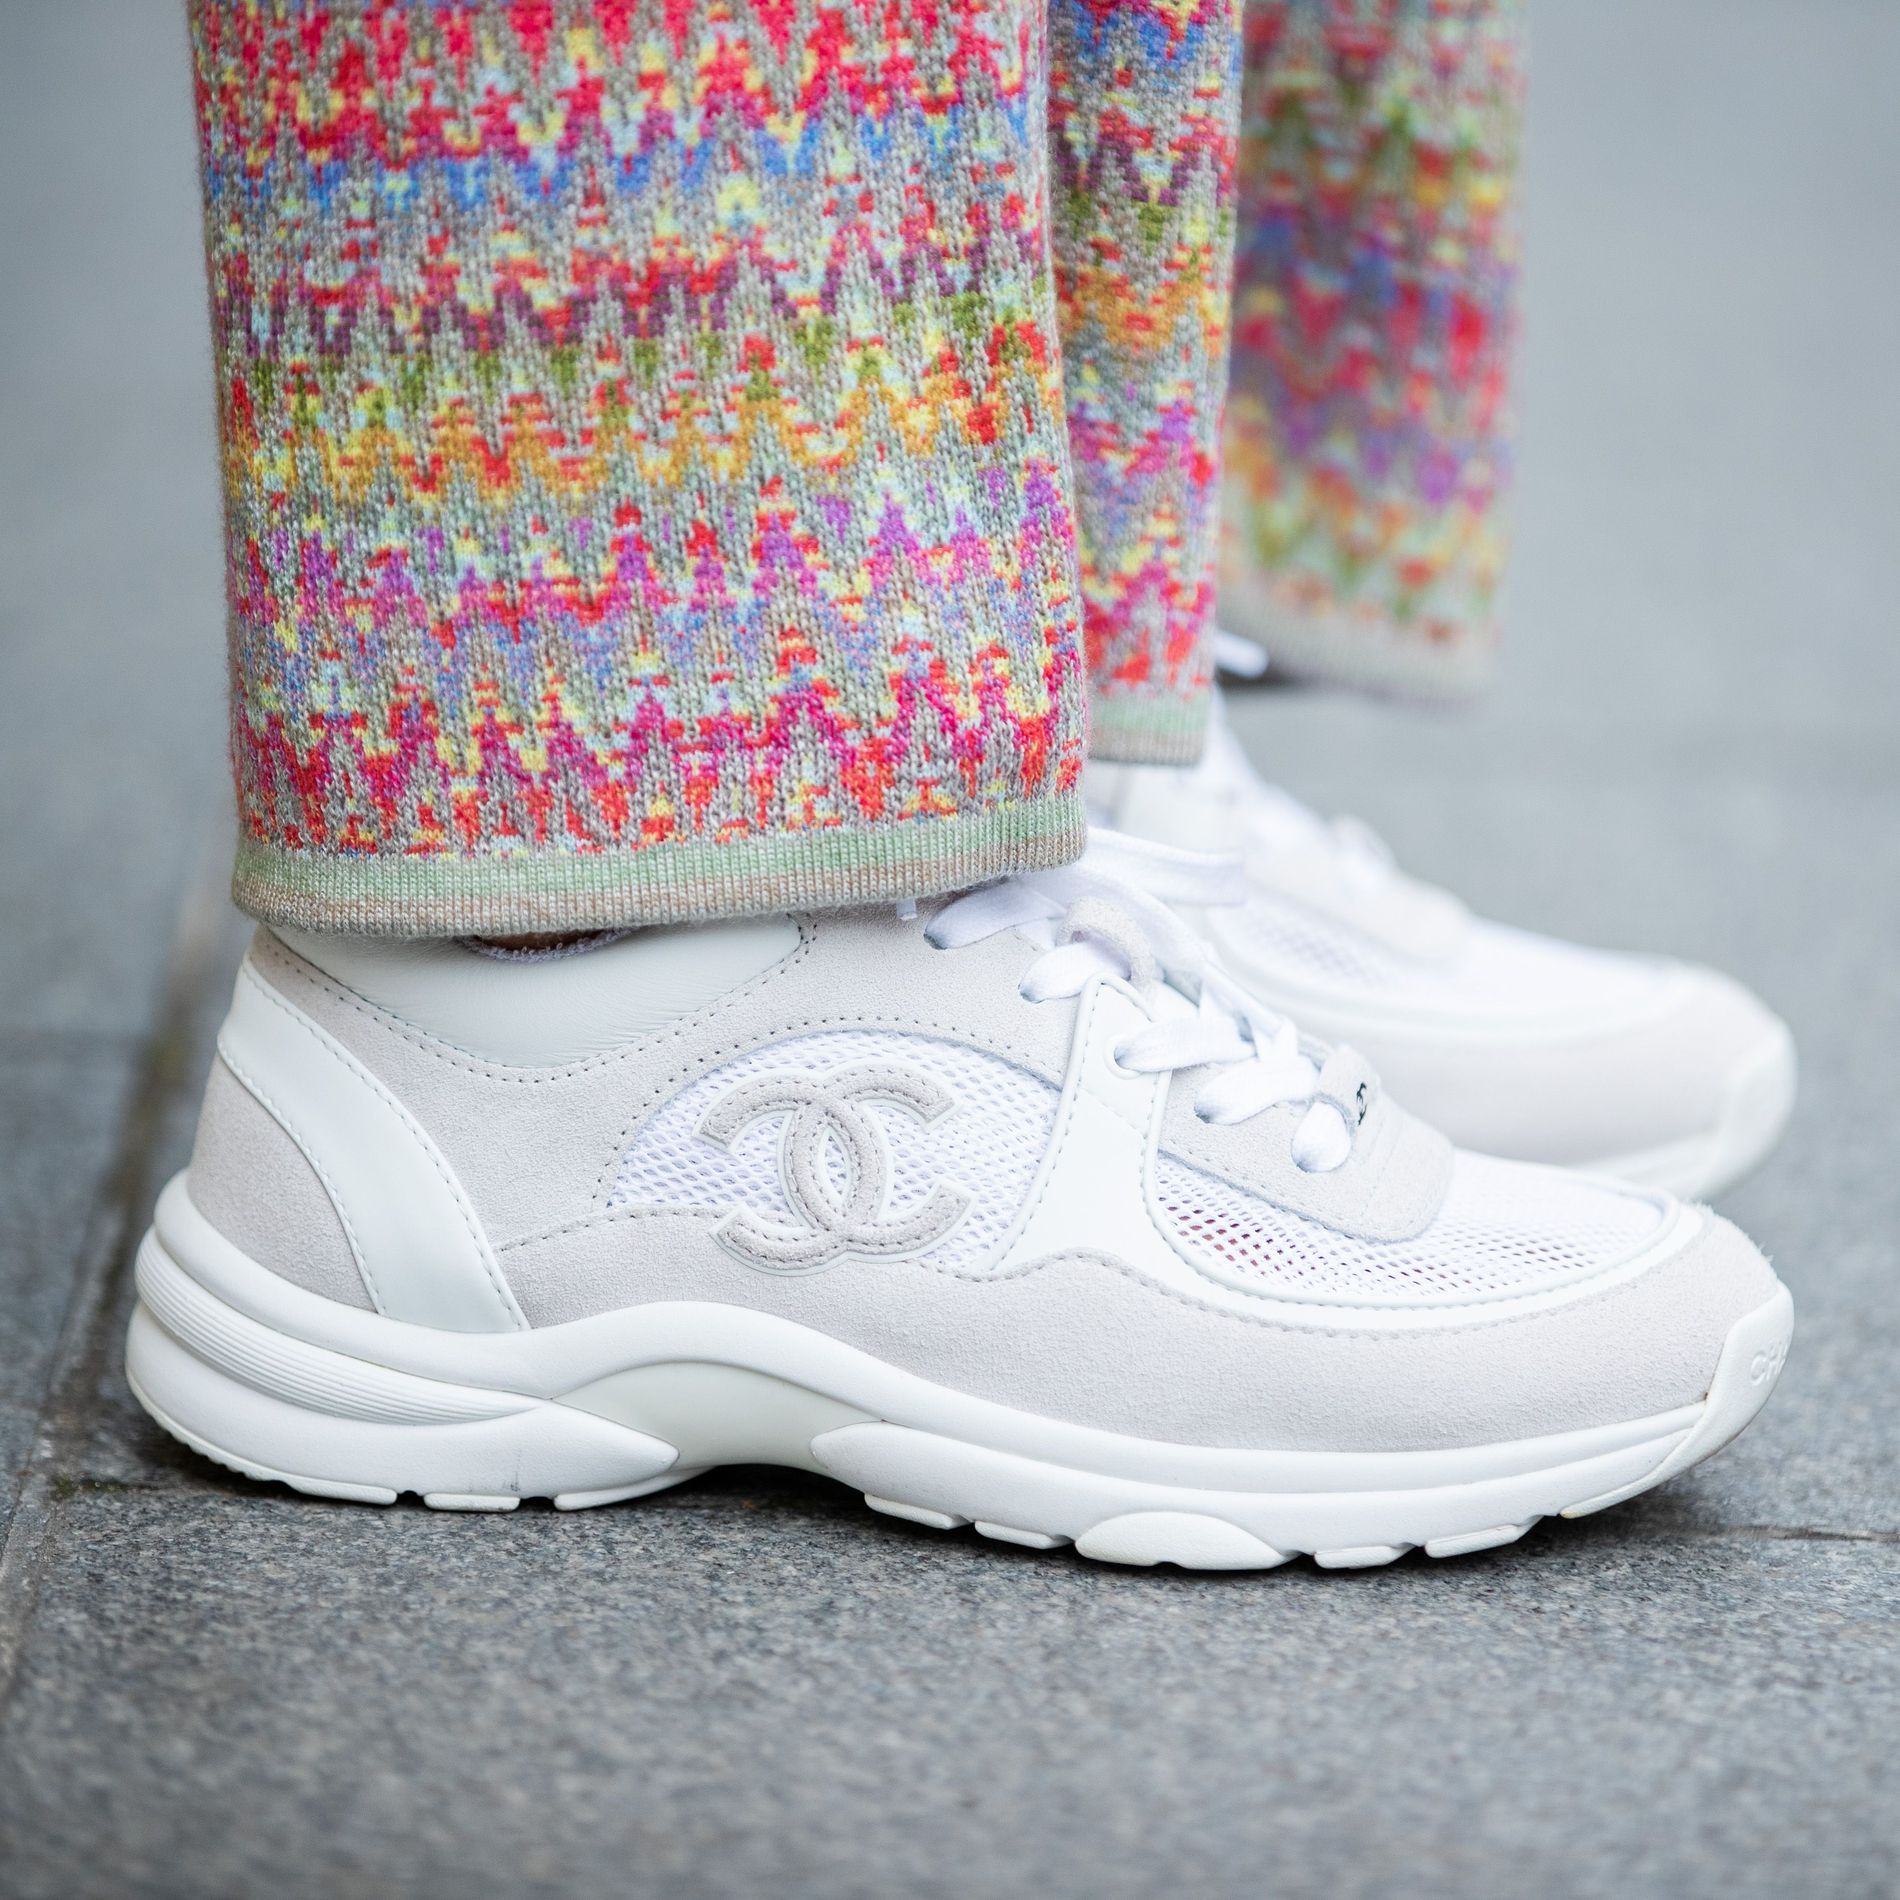 White Chanel Sneakers streetstyle